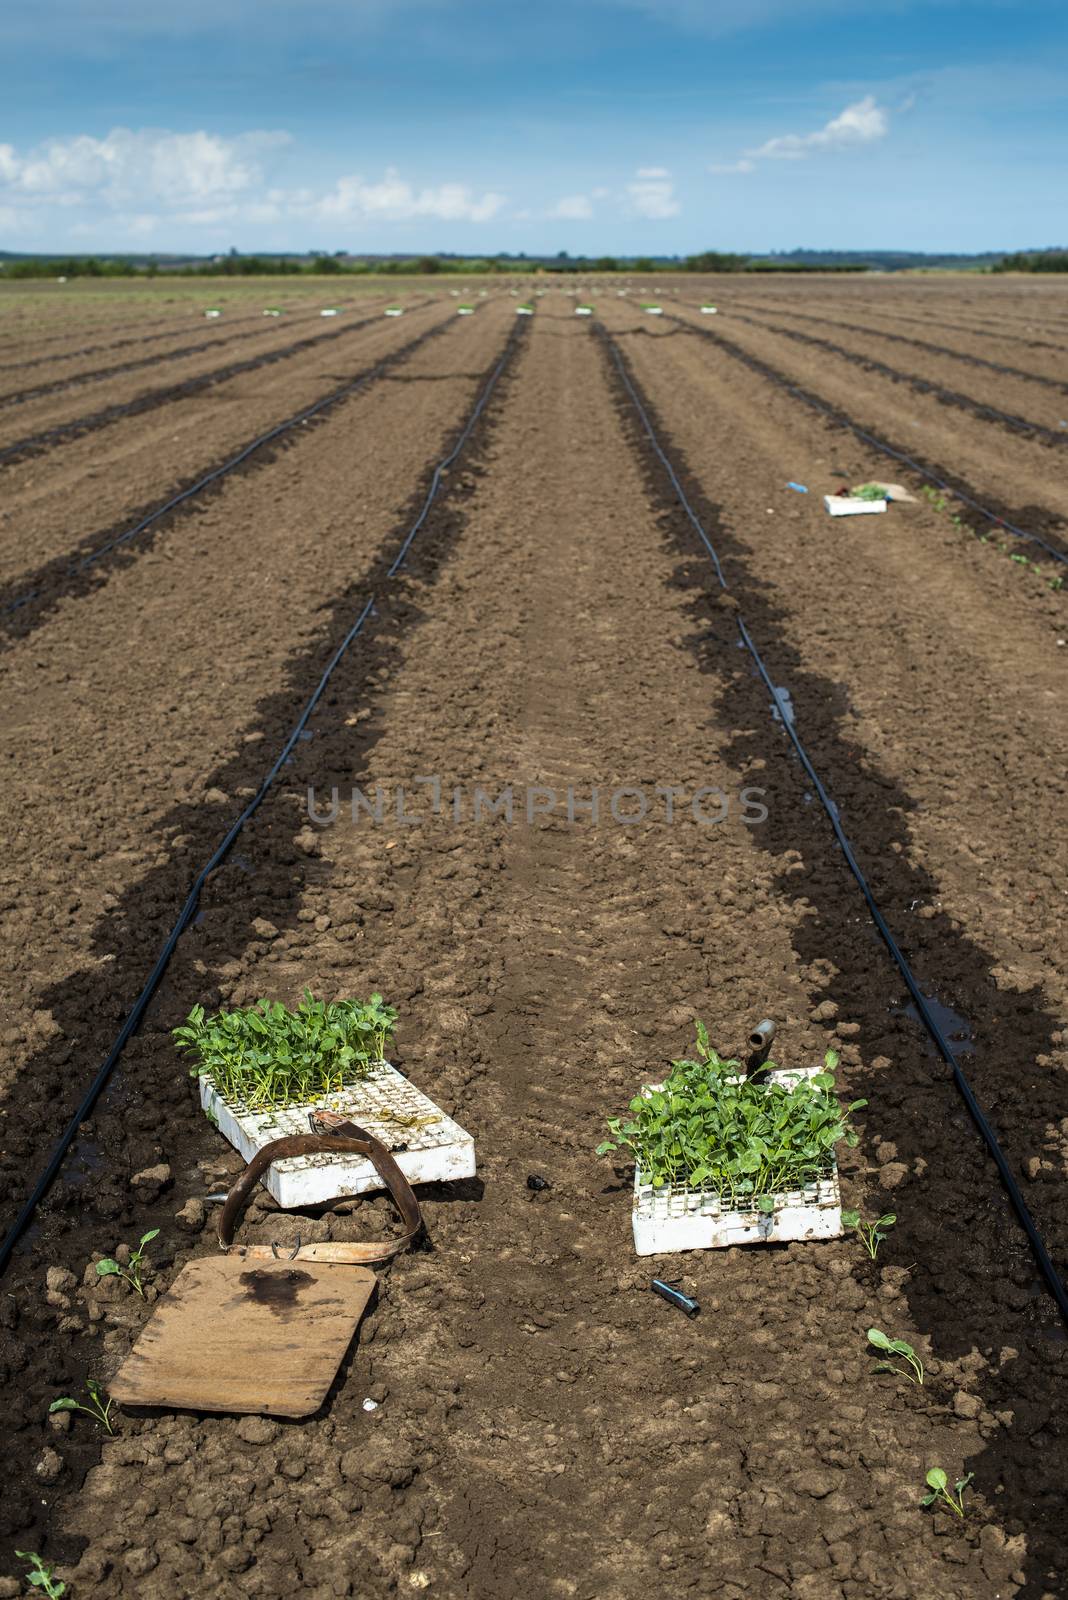 Seedlings in crates on the agriculture land. Planting broccoli i by deyan_georgiev